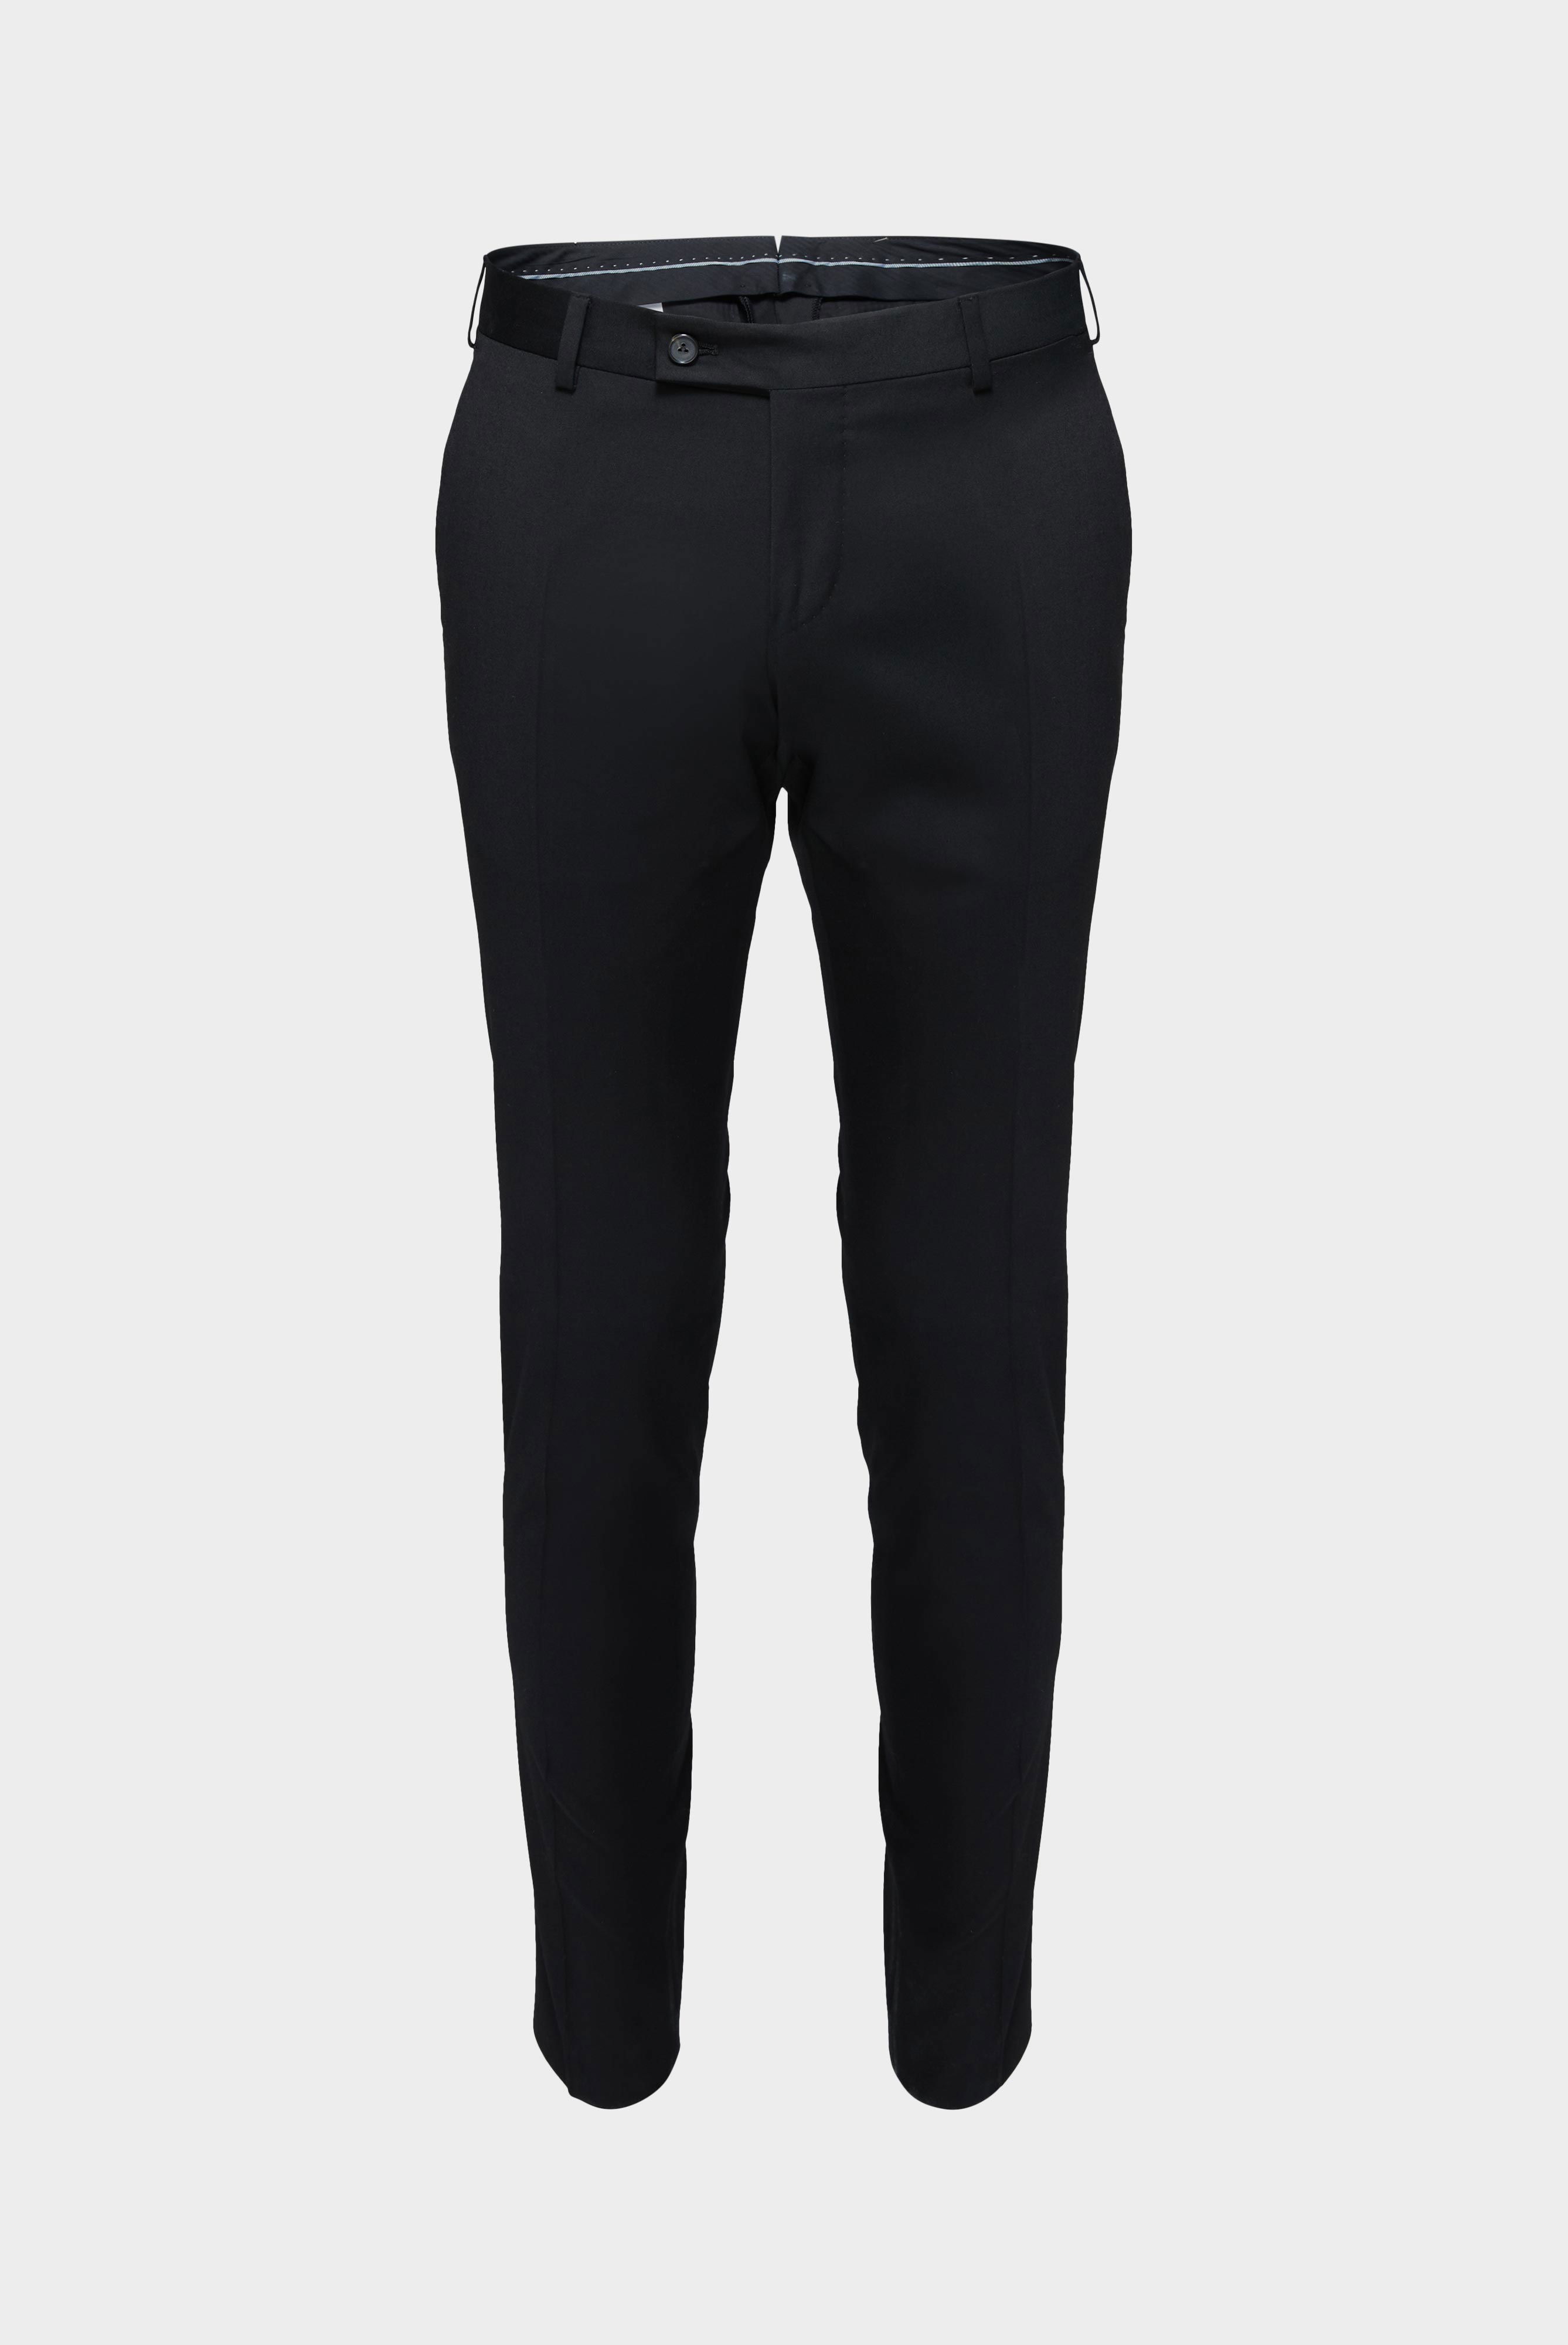 Jeans & Trousers+Wool Trousers Slim Fit+20.7880.16.H01010.099.44